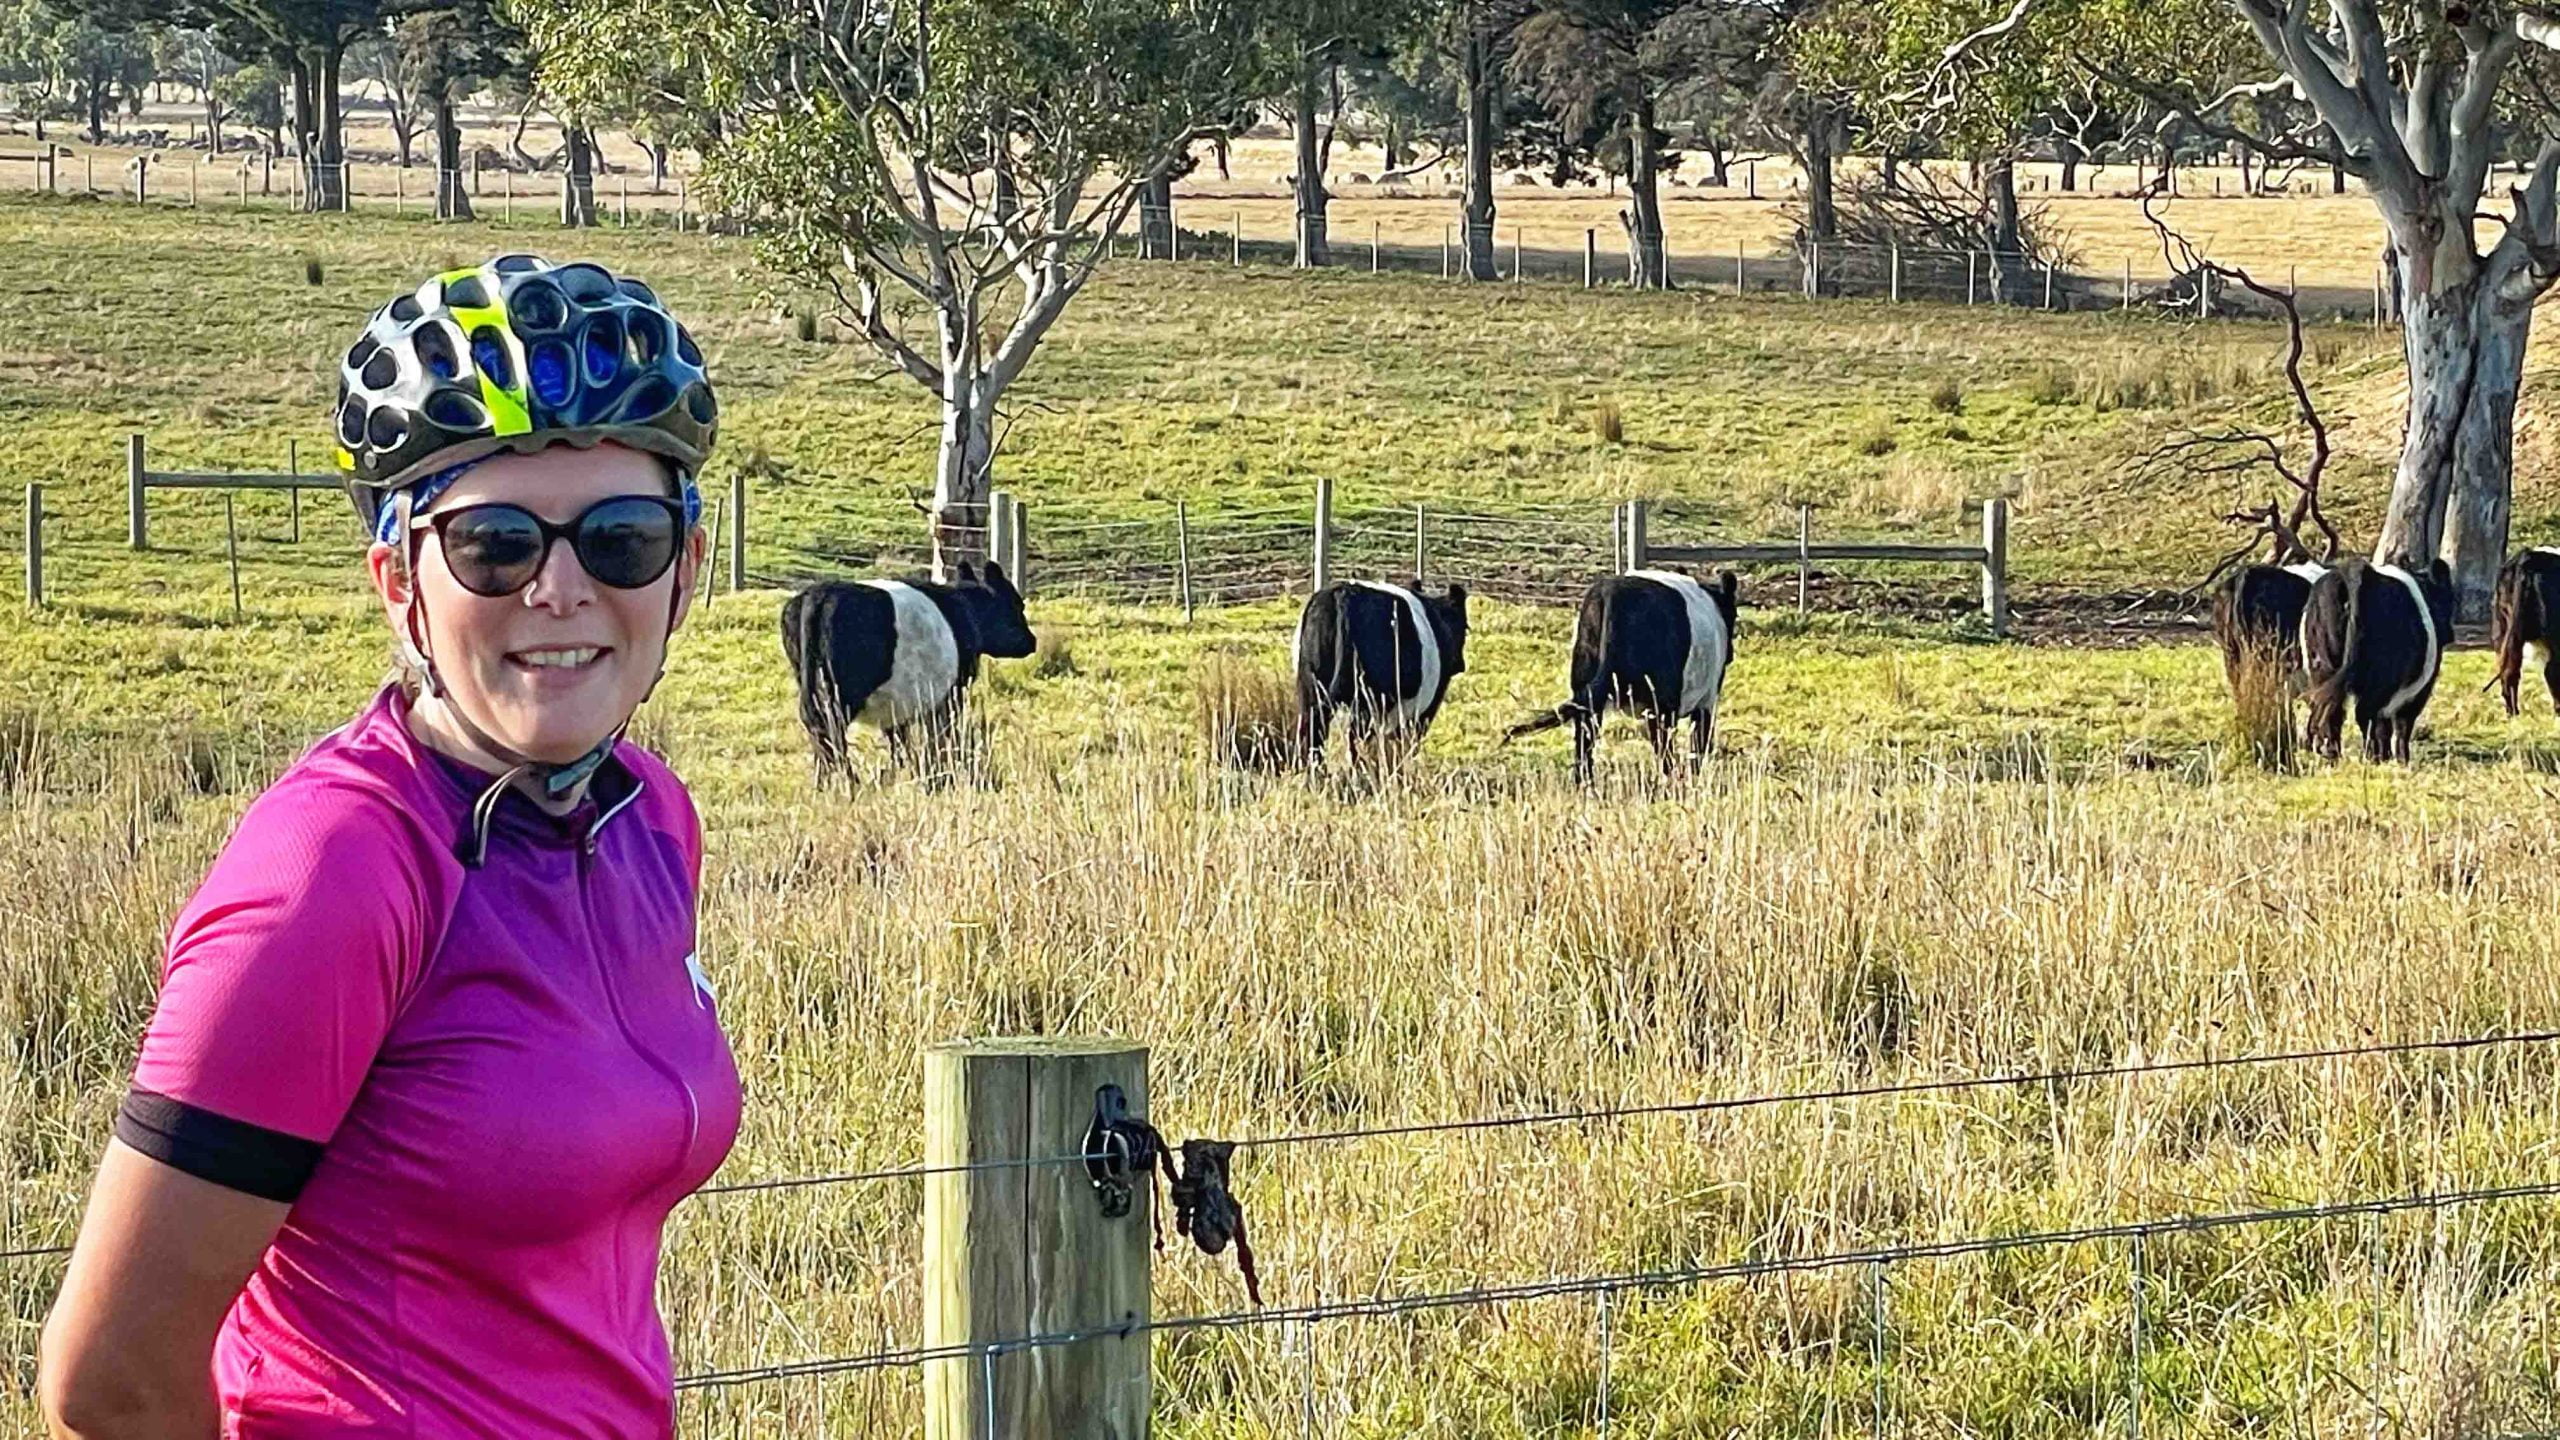 Cows and cyclist at the Bellarine Peninsula (photo taken at Curlewis)